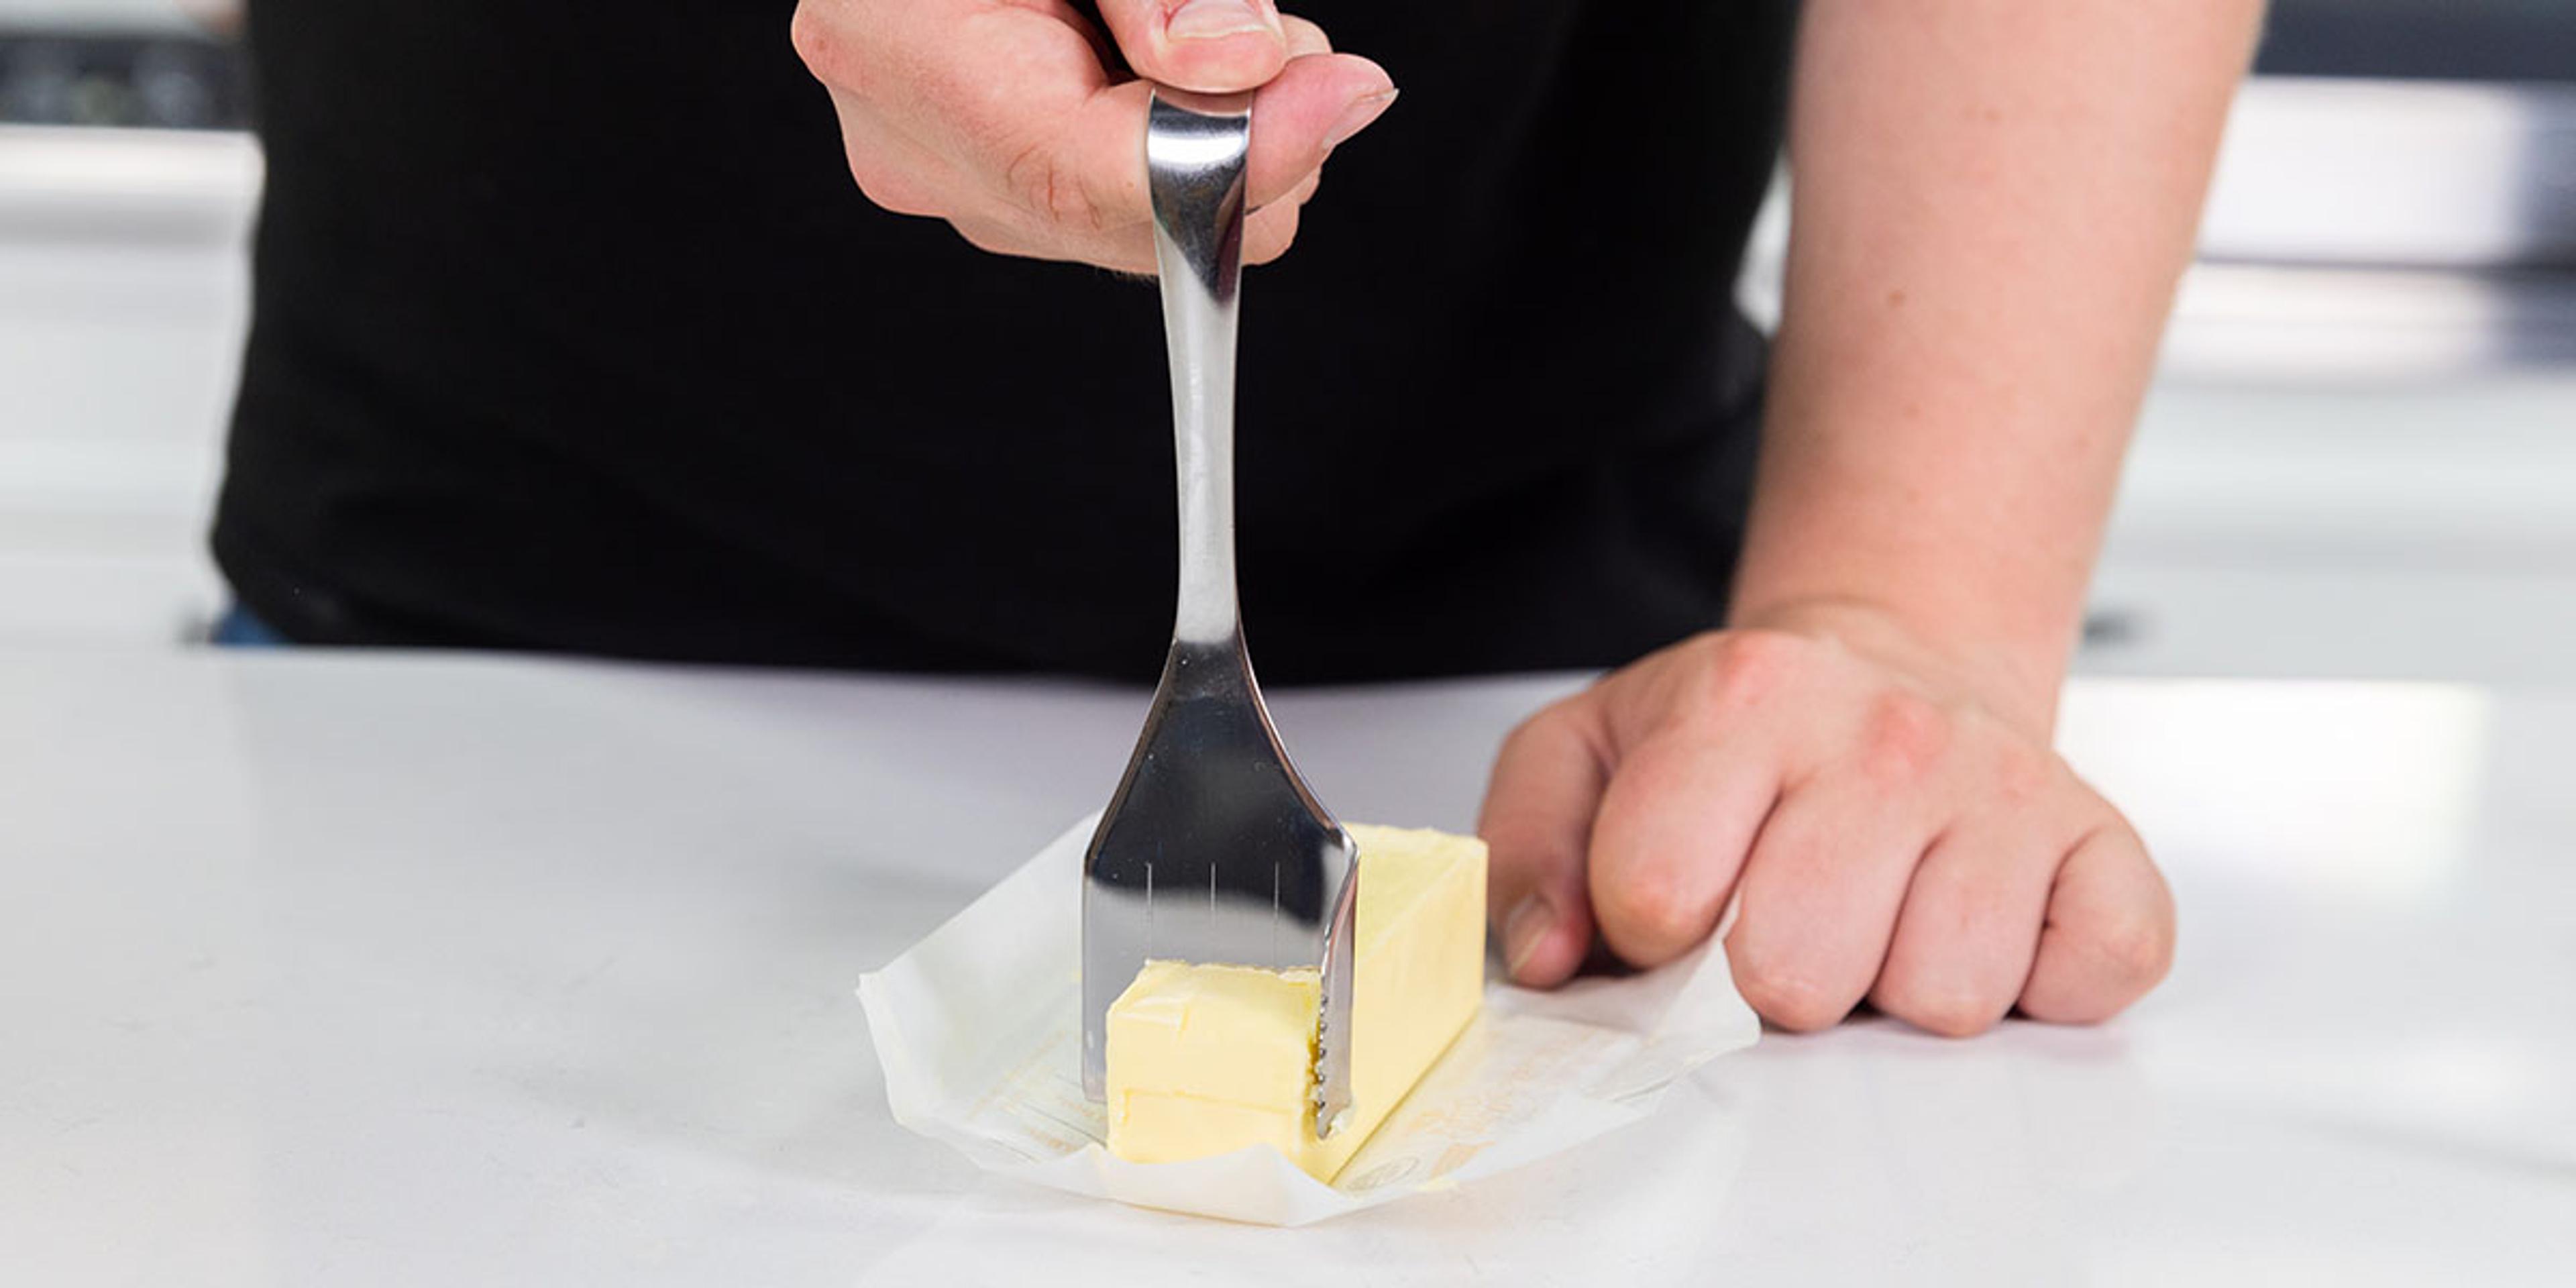 A man uses a butter cutting partitioner metering gadget to slice Organic Valley Butter.